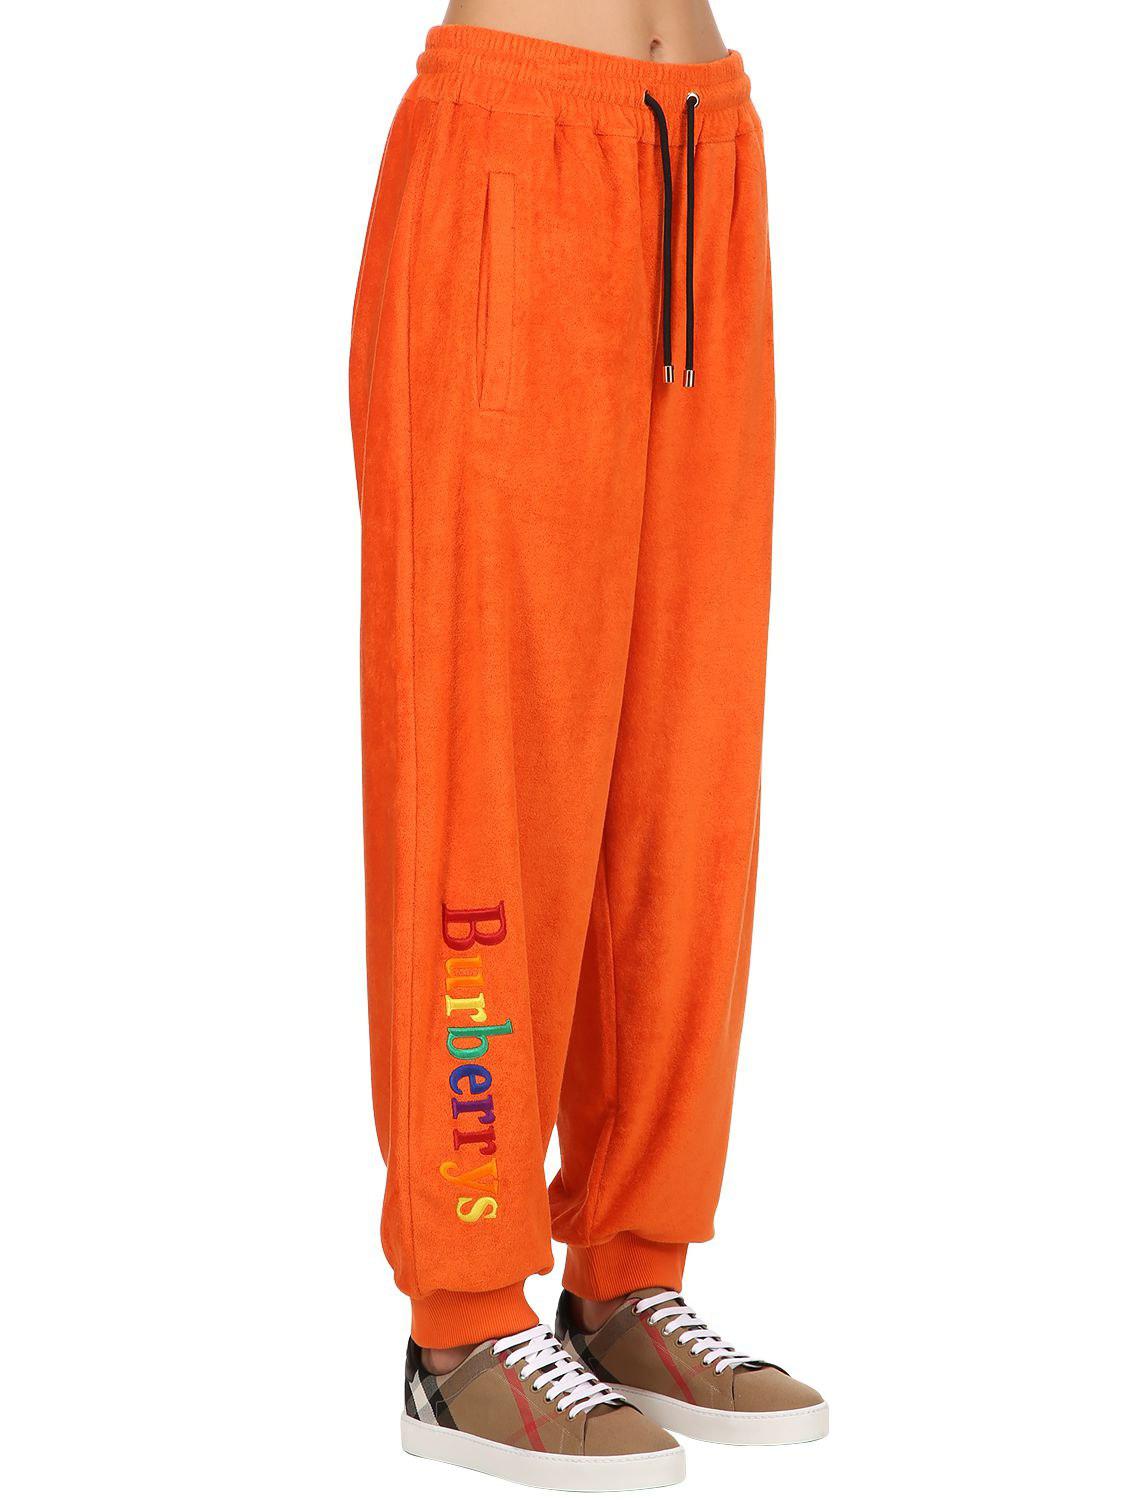 French Terry Sweatpants in Orange 